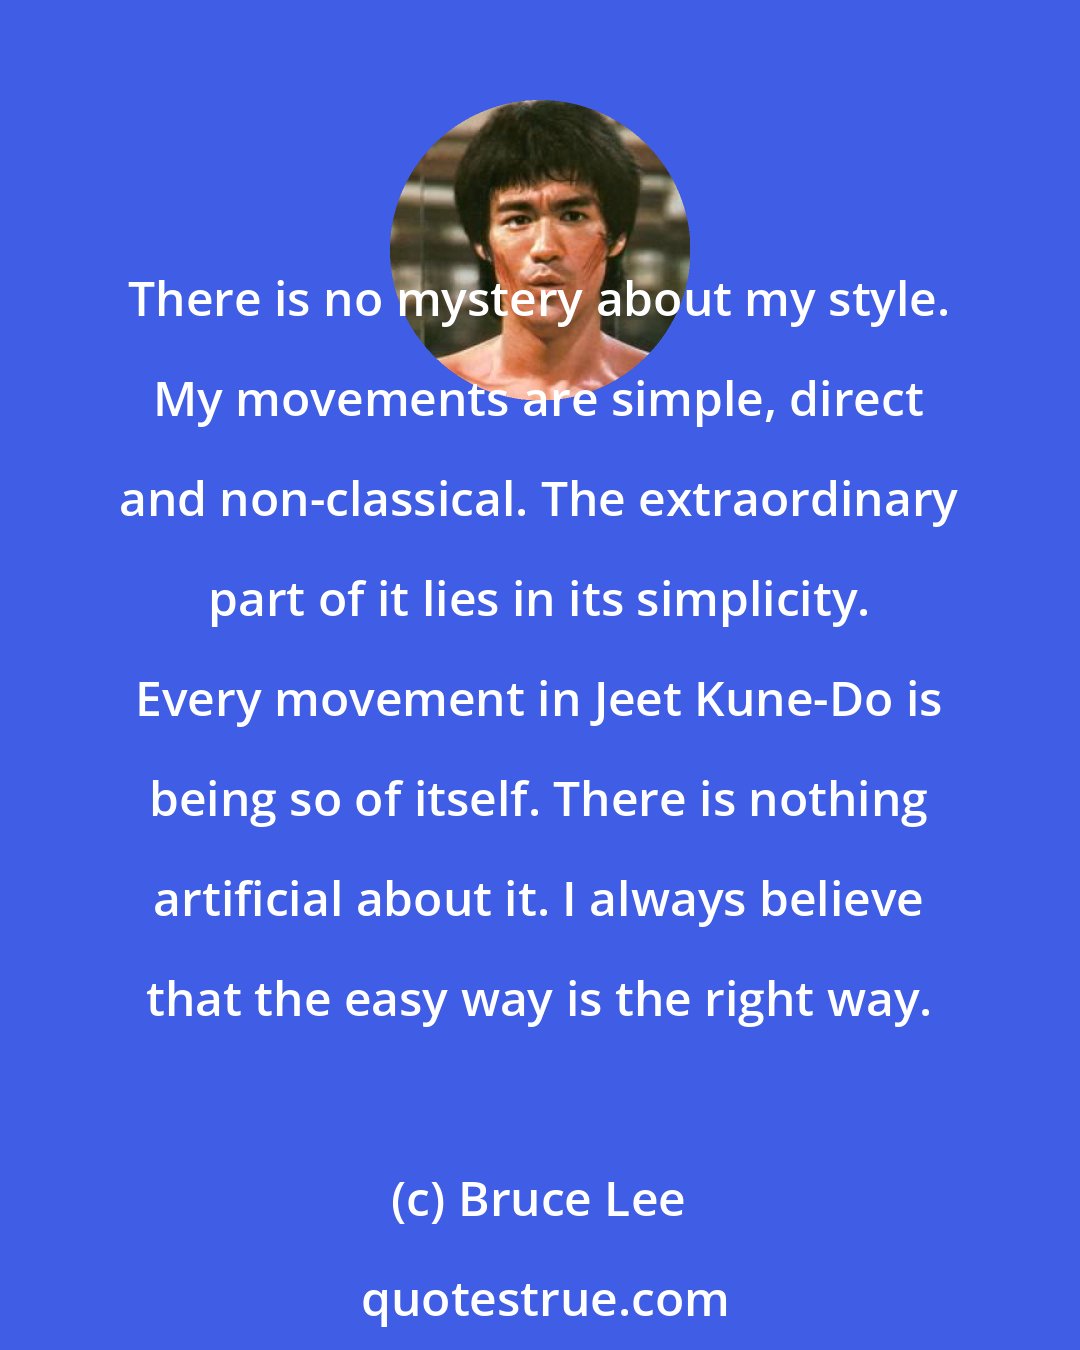 Bruce Lee: There is no mystery about my style. My movements are simple, direct and non-classical. The extraordinary part of it lies in its simplicity. Every movement in Jeet Kune-Do is being so of itself. There is nothing artificial about it. I always believe that the easy way is the right way.